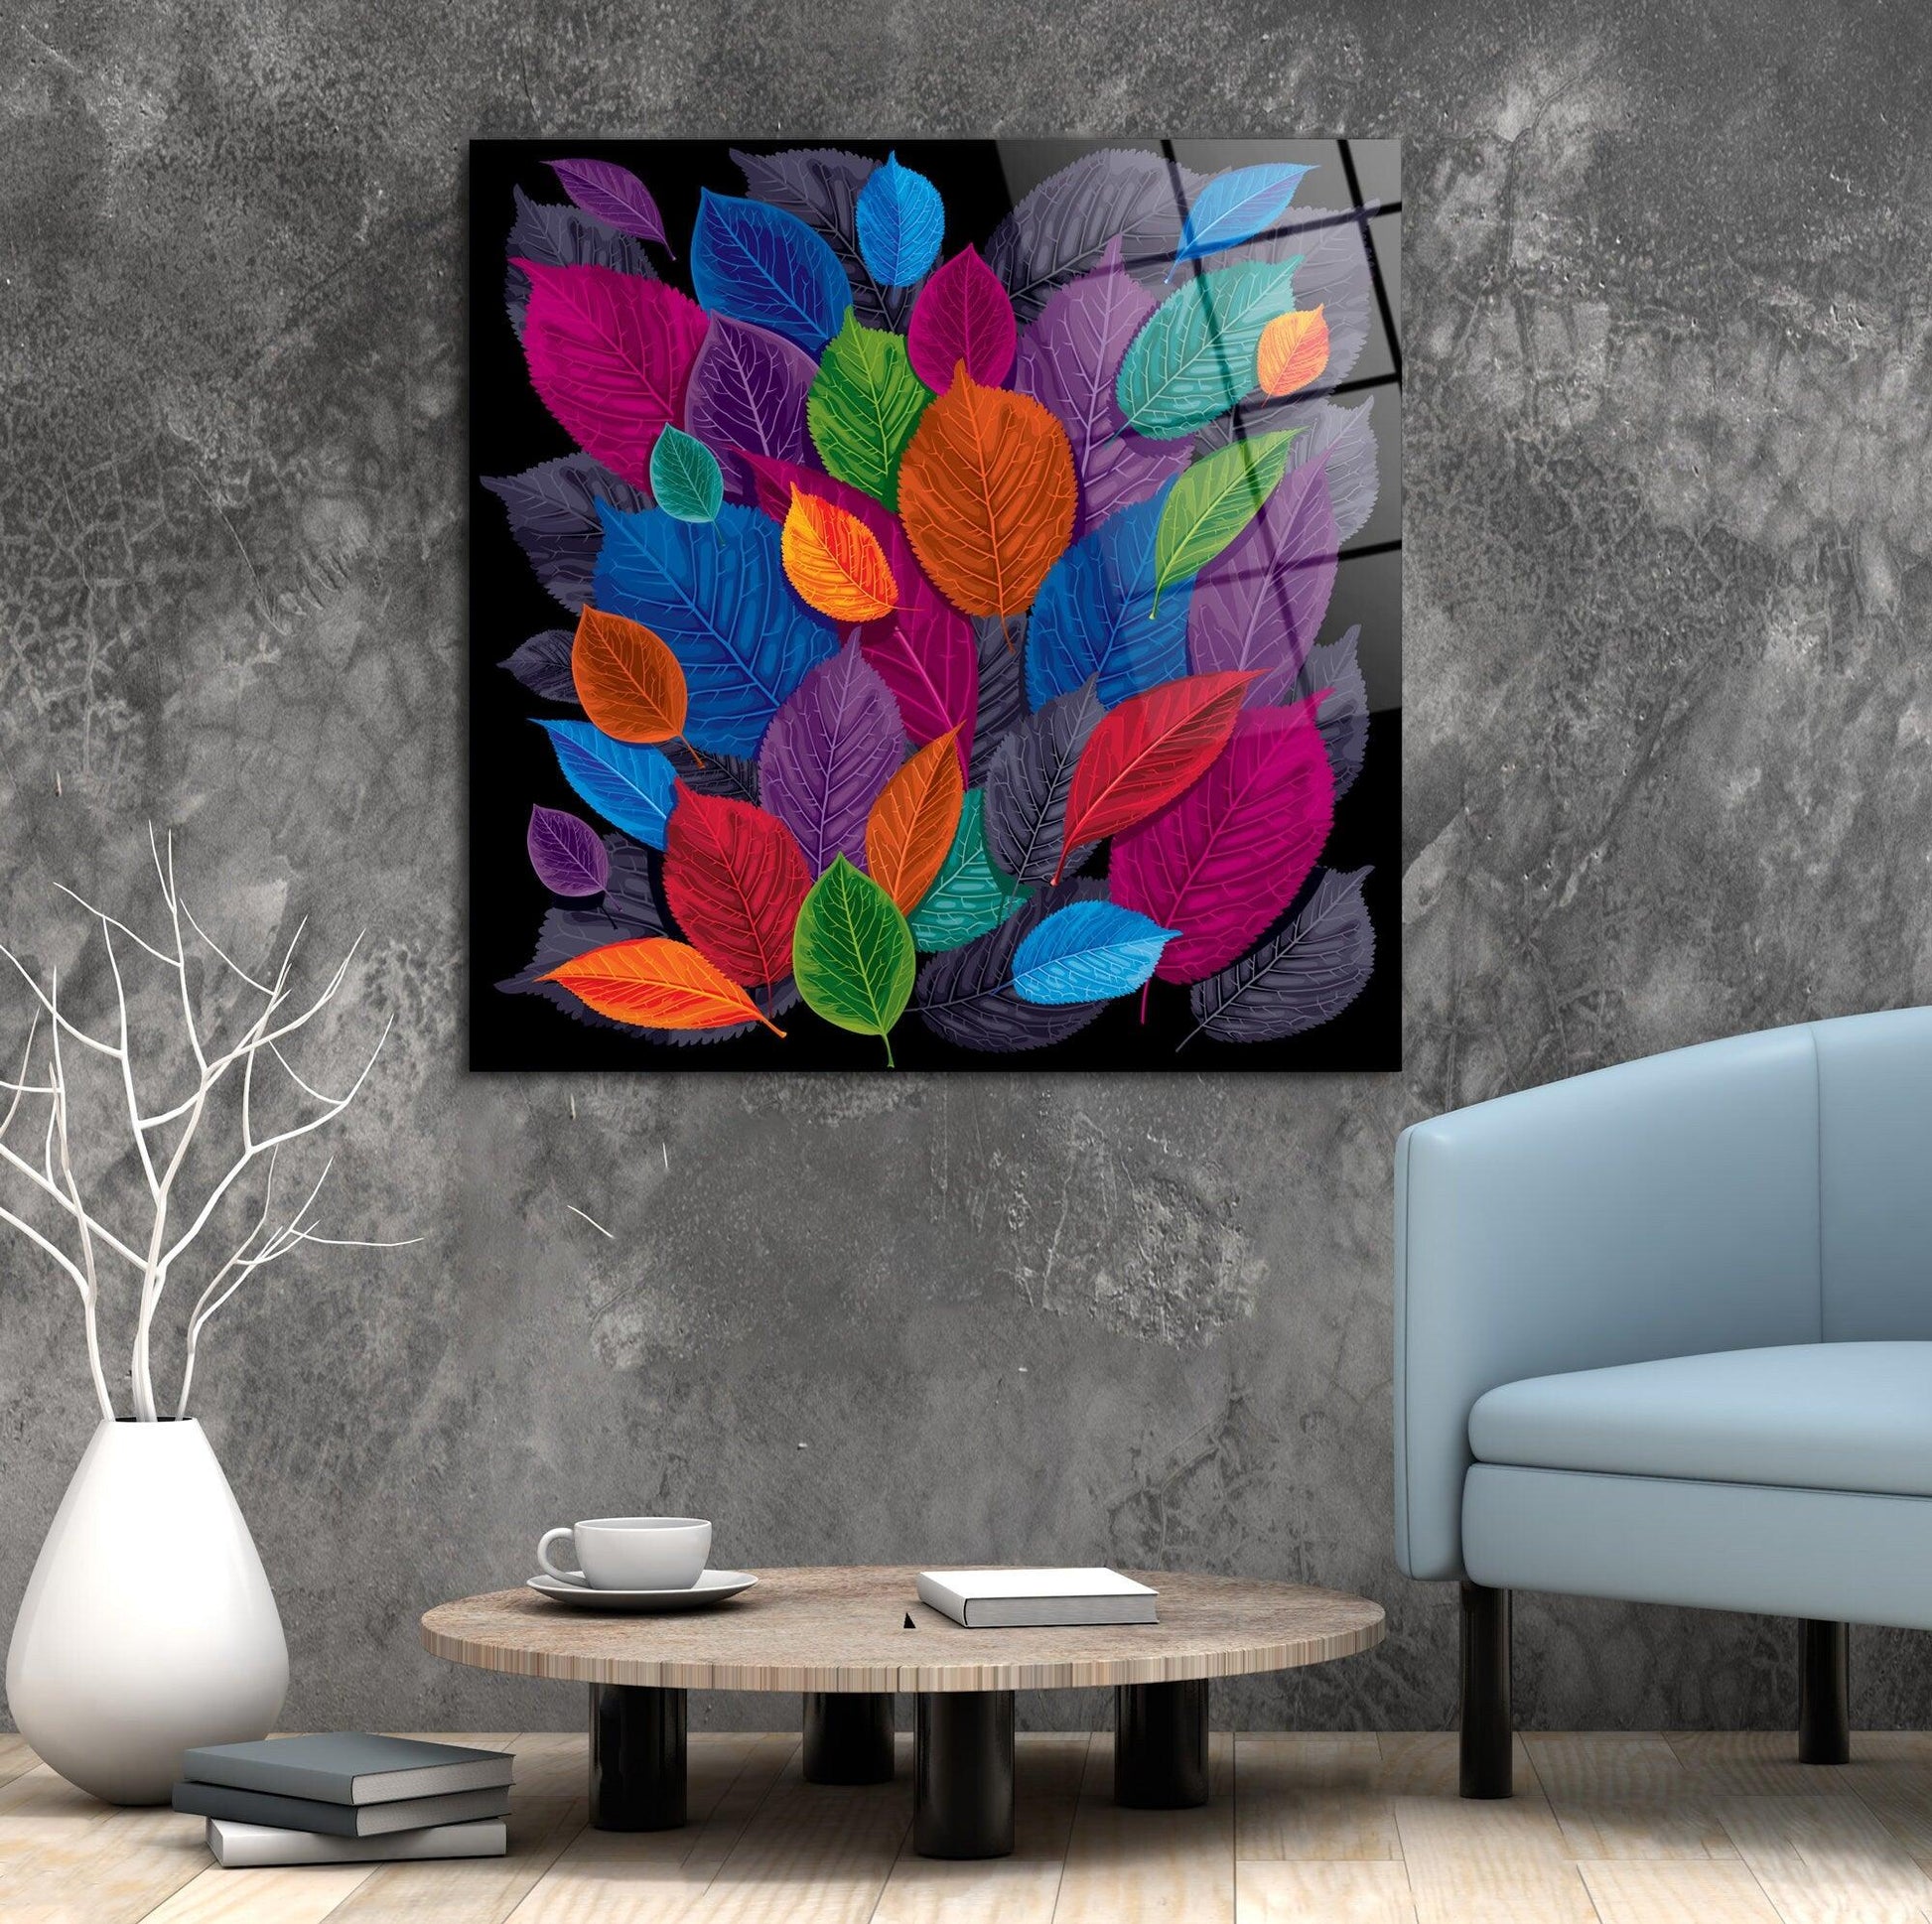 A Moment Made of Glass - Abstract Digital Wall Art Print - BIG Wall Décor